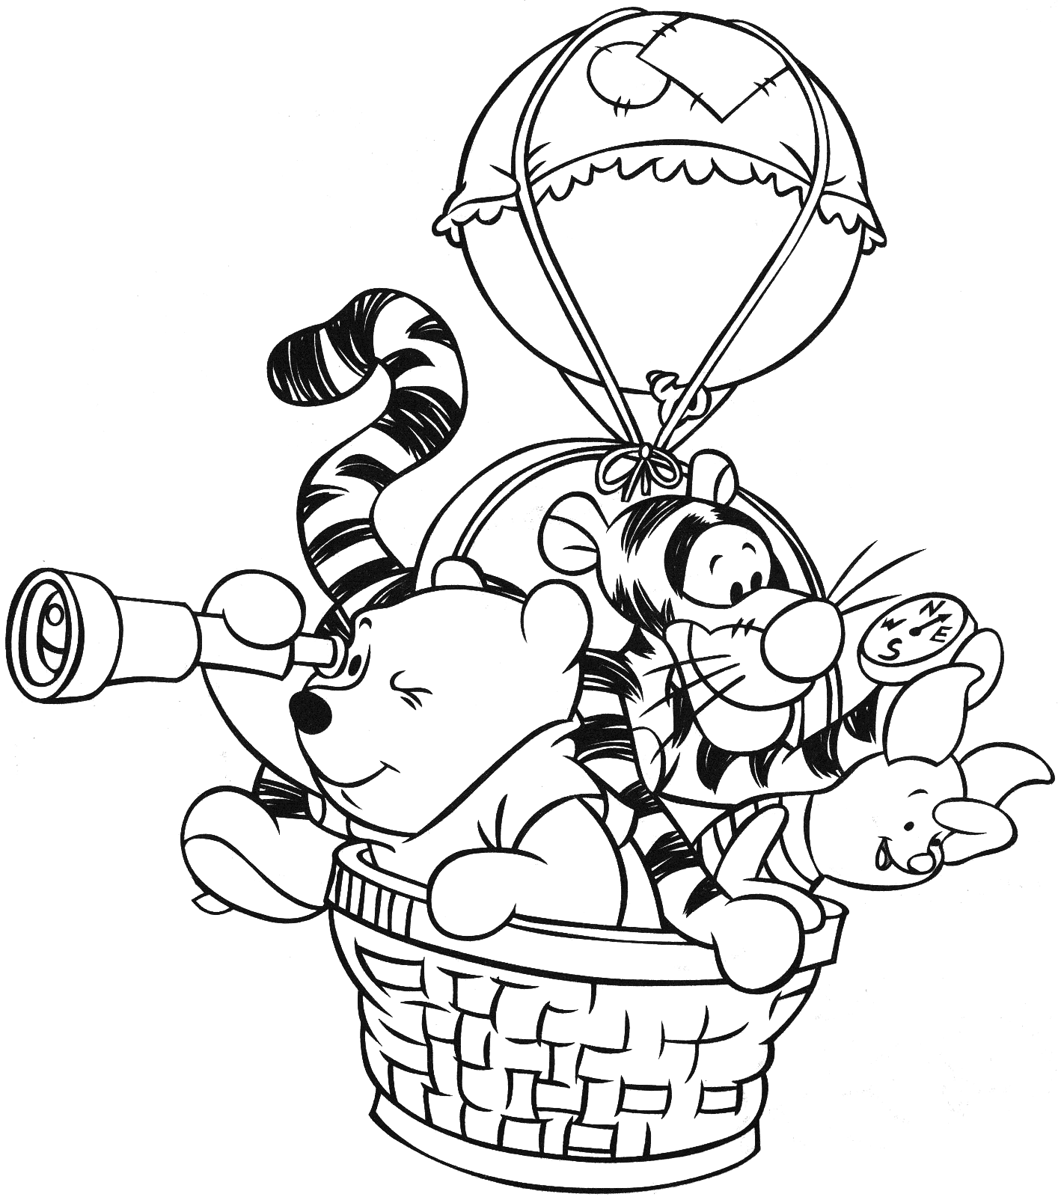 Download winnie the pooh coloring page - Free Coloring Pages ...